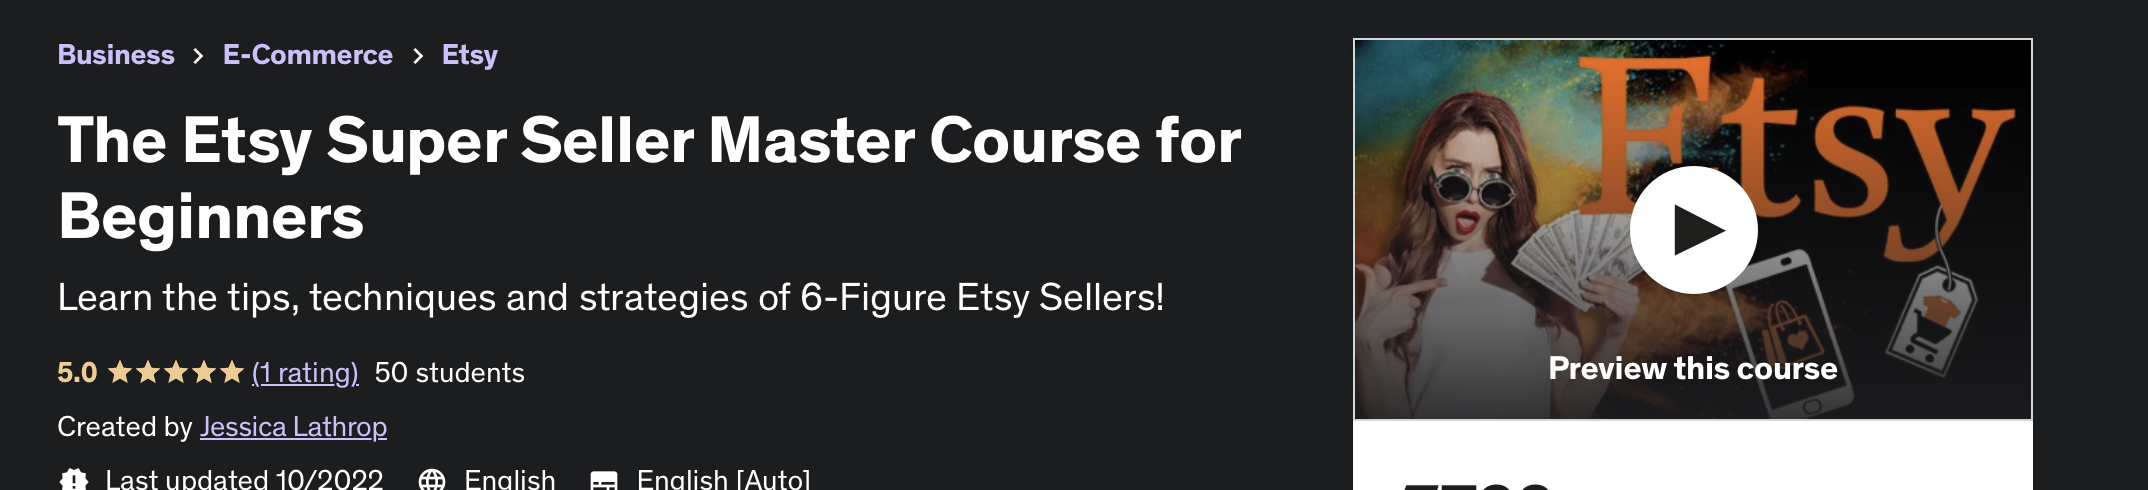 The Etsy Super Seller Master Course For Beginners